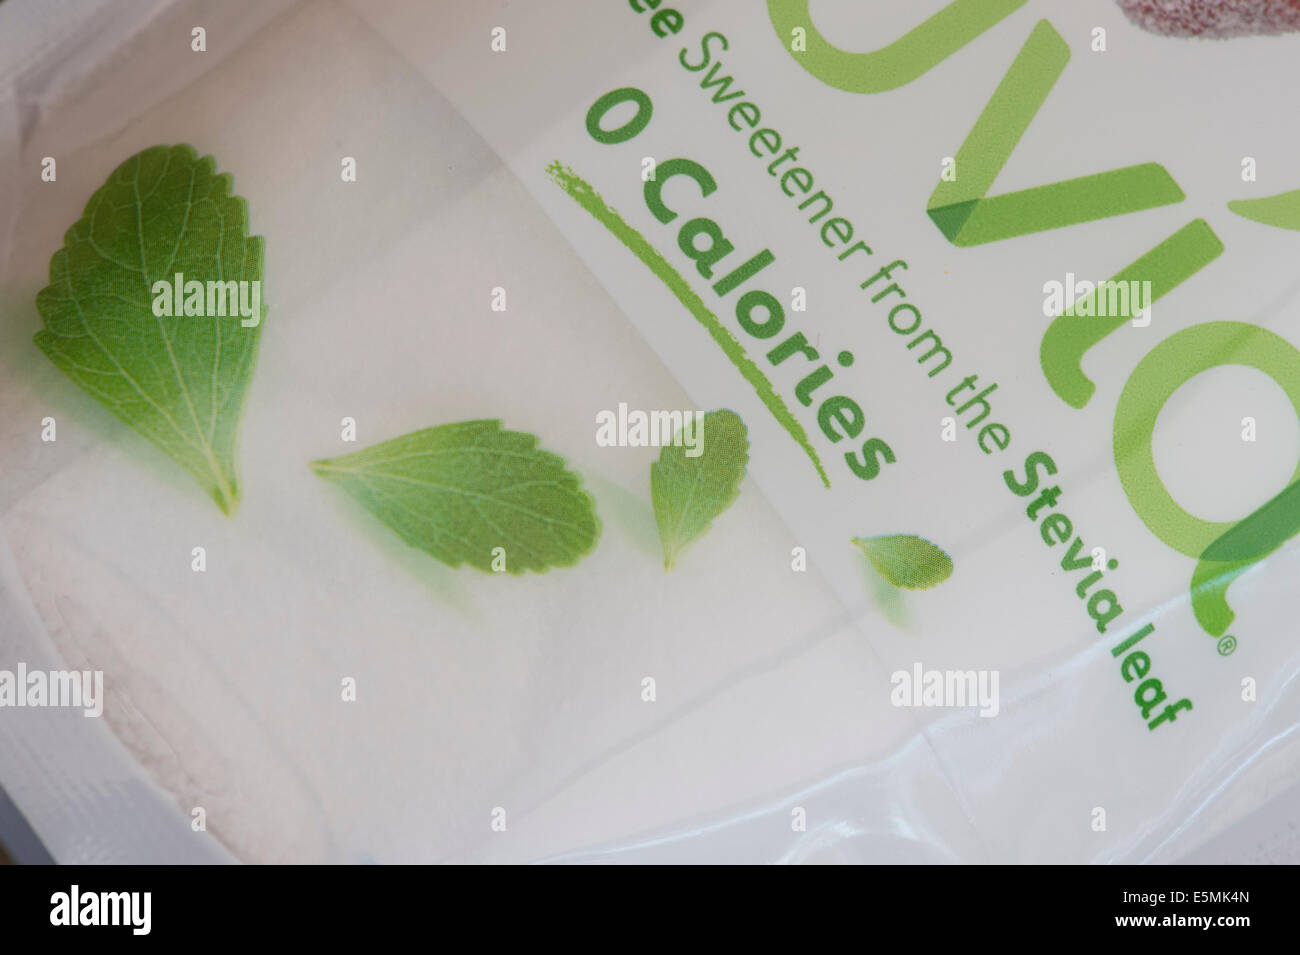 Truvia , Calorie Free Sweetener made from Stevia Leaf. Food packet labeling Stock Photo